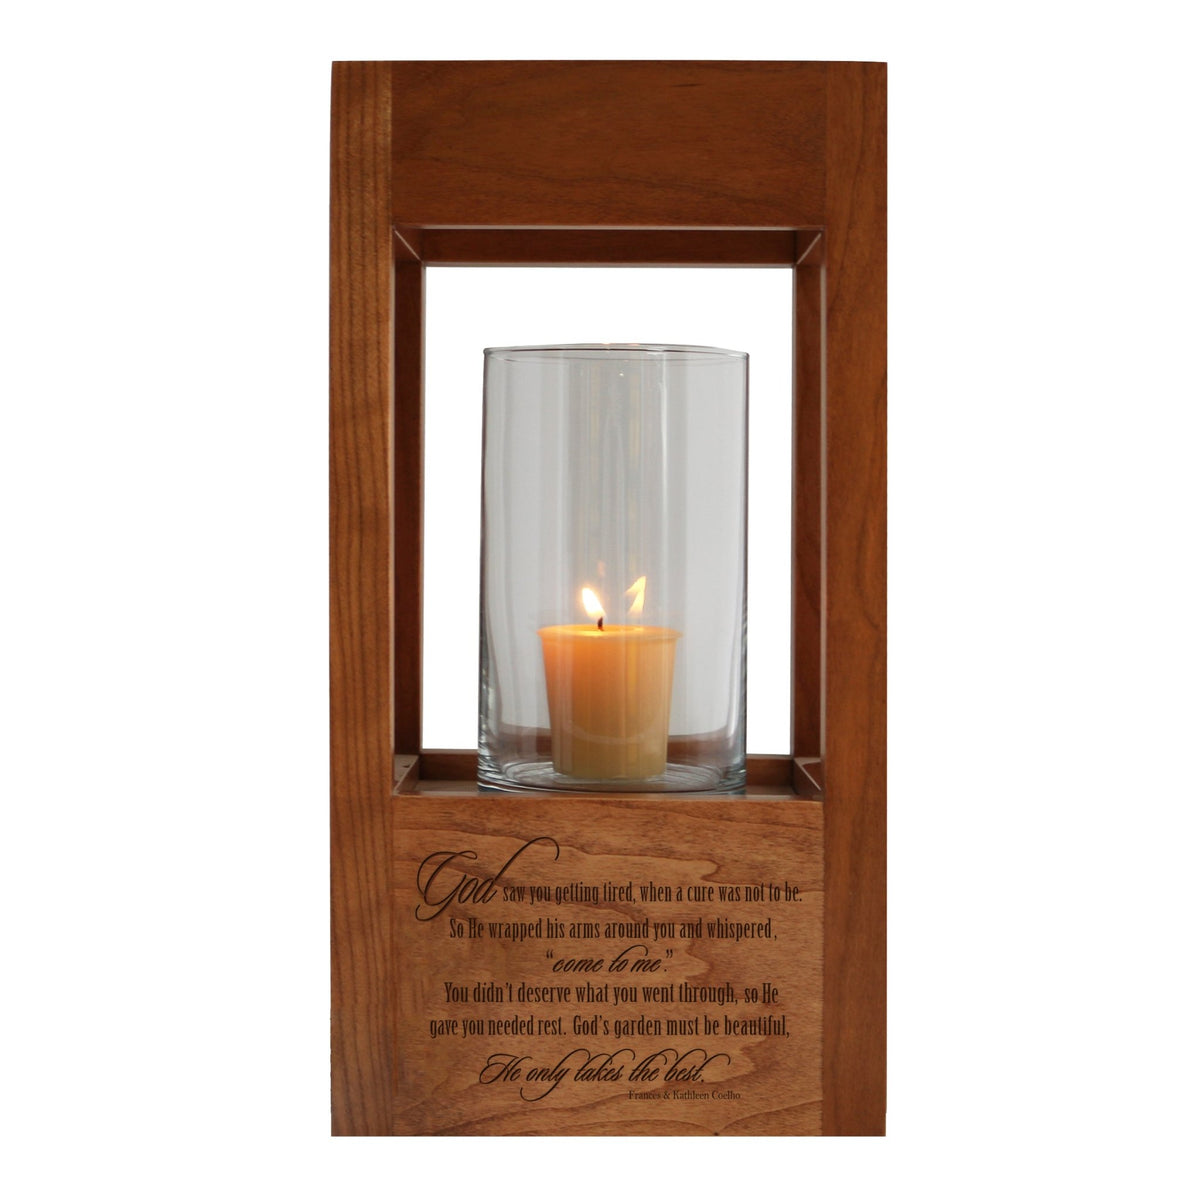 Candle Memorial Cremation Lantern Urn For Human Ashes holds 81 cu in - LifeSong Milestones